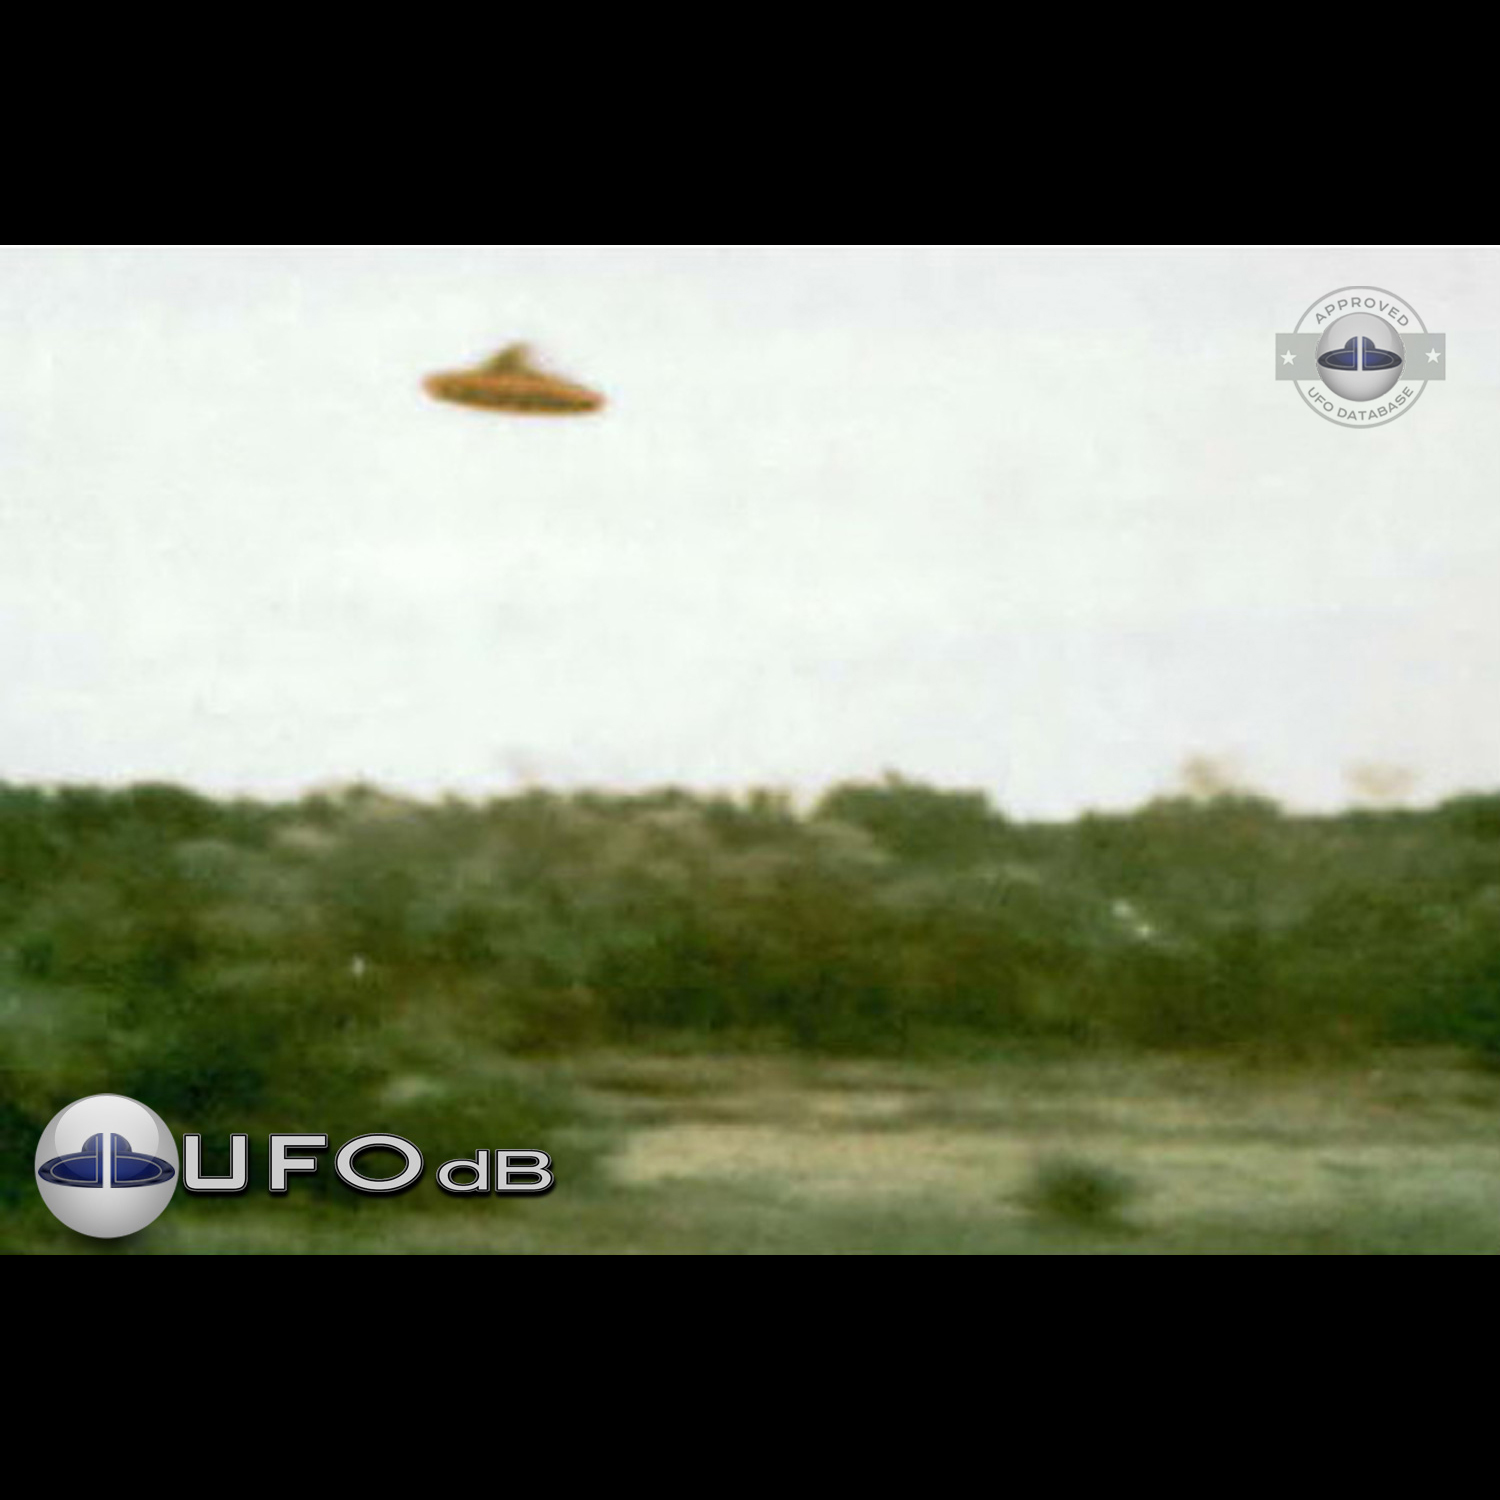 ufo picture was taken from a car ufo was few hundreds meters away UFO Picture #62-1